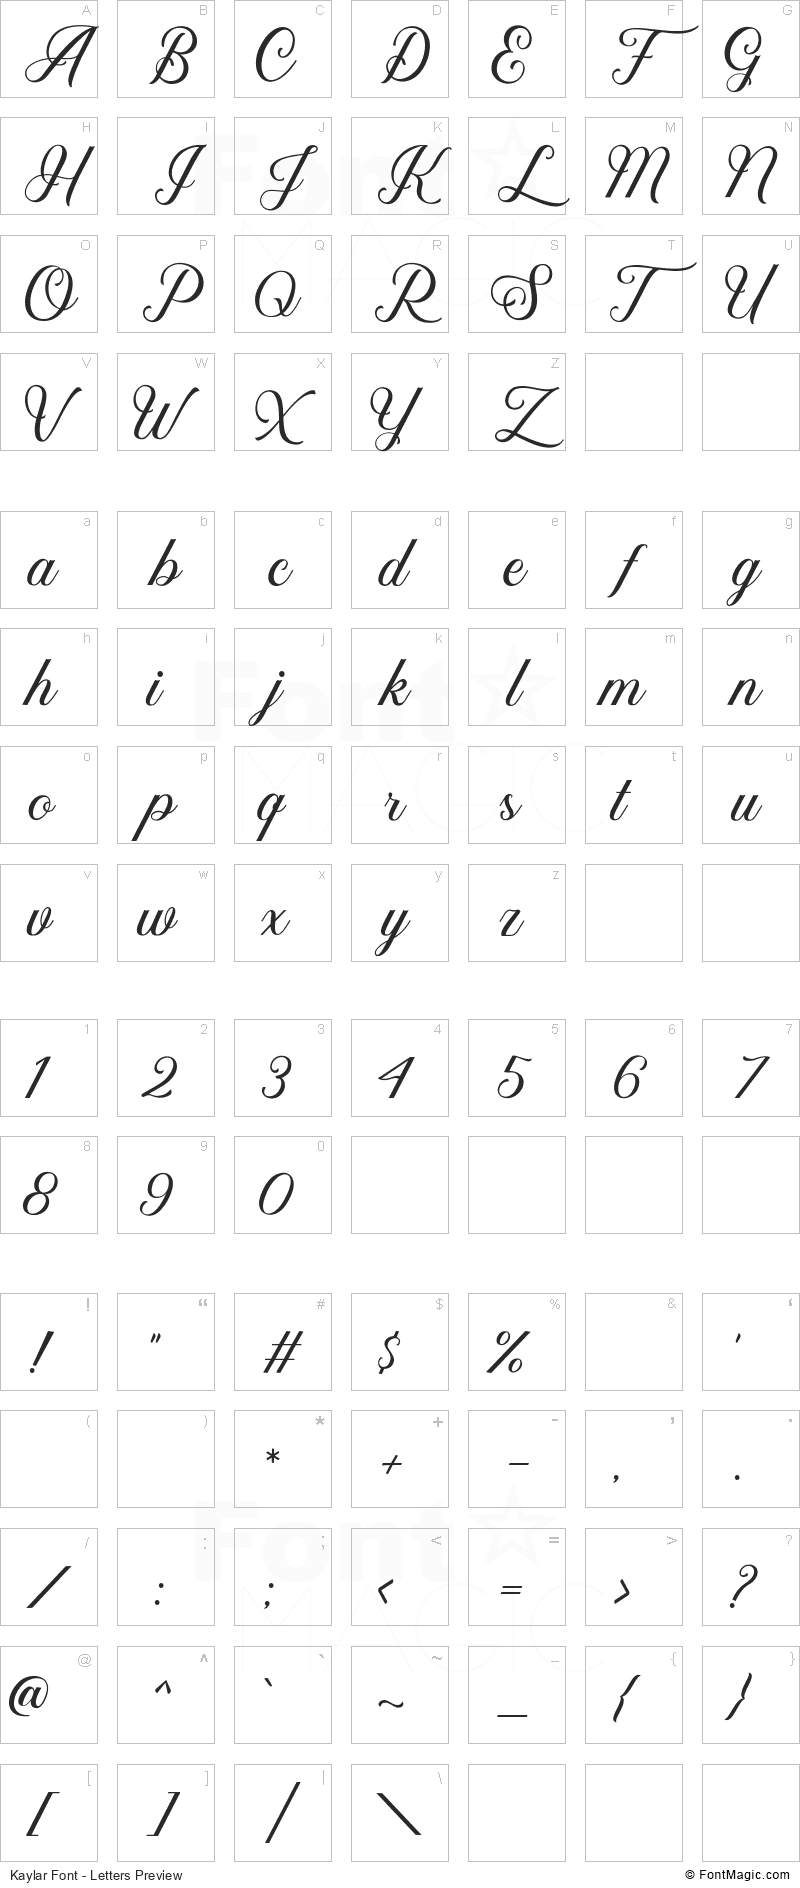 Kaylar Font - All Latters Preview Chart